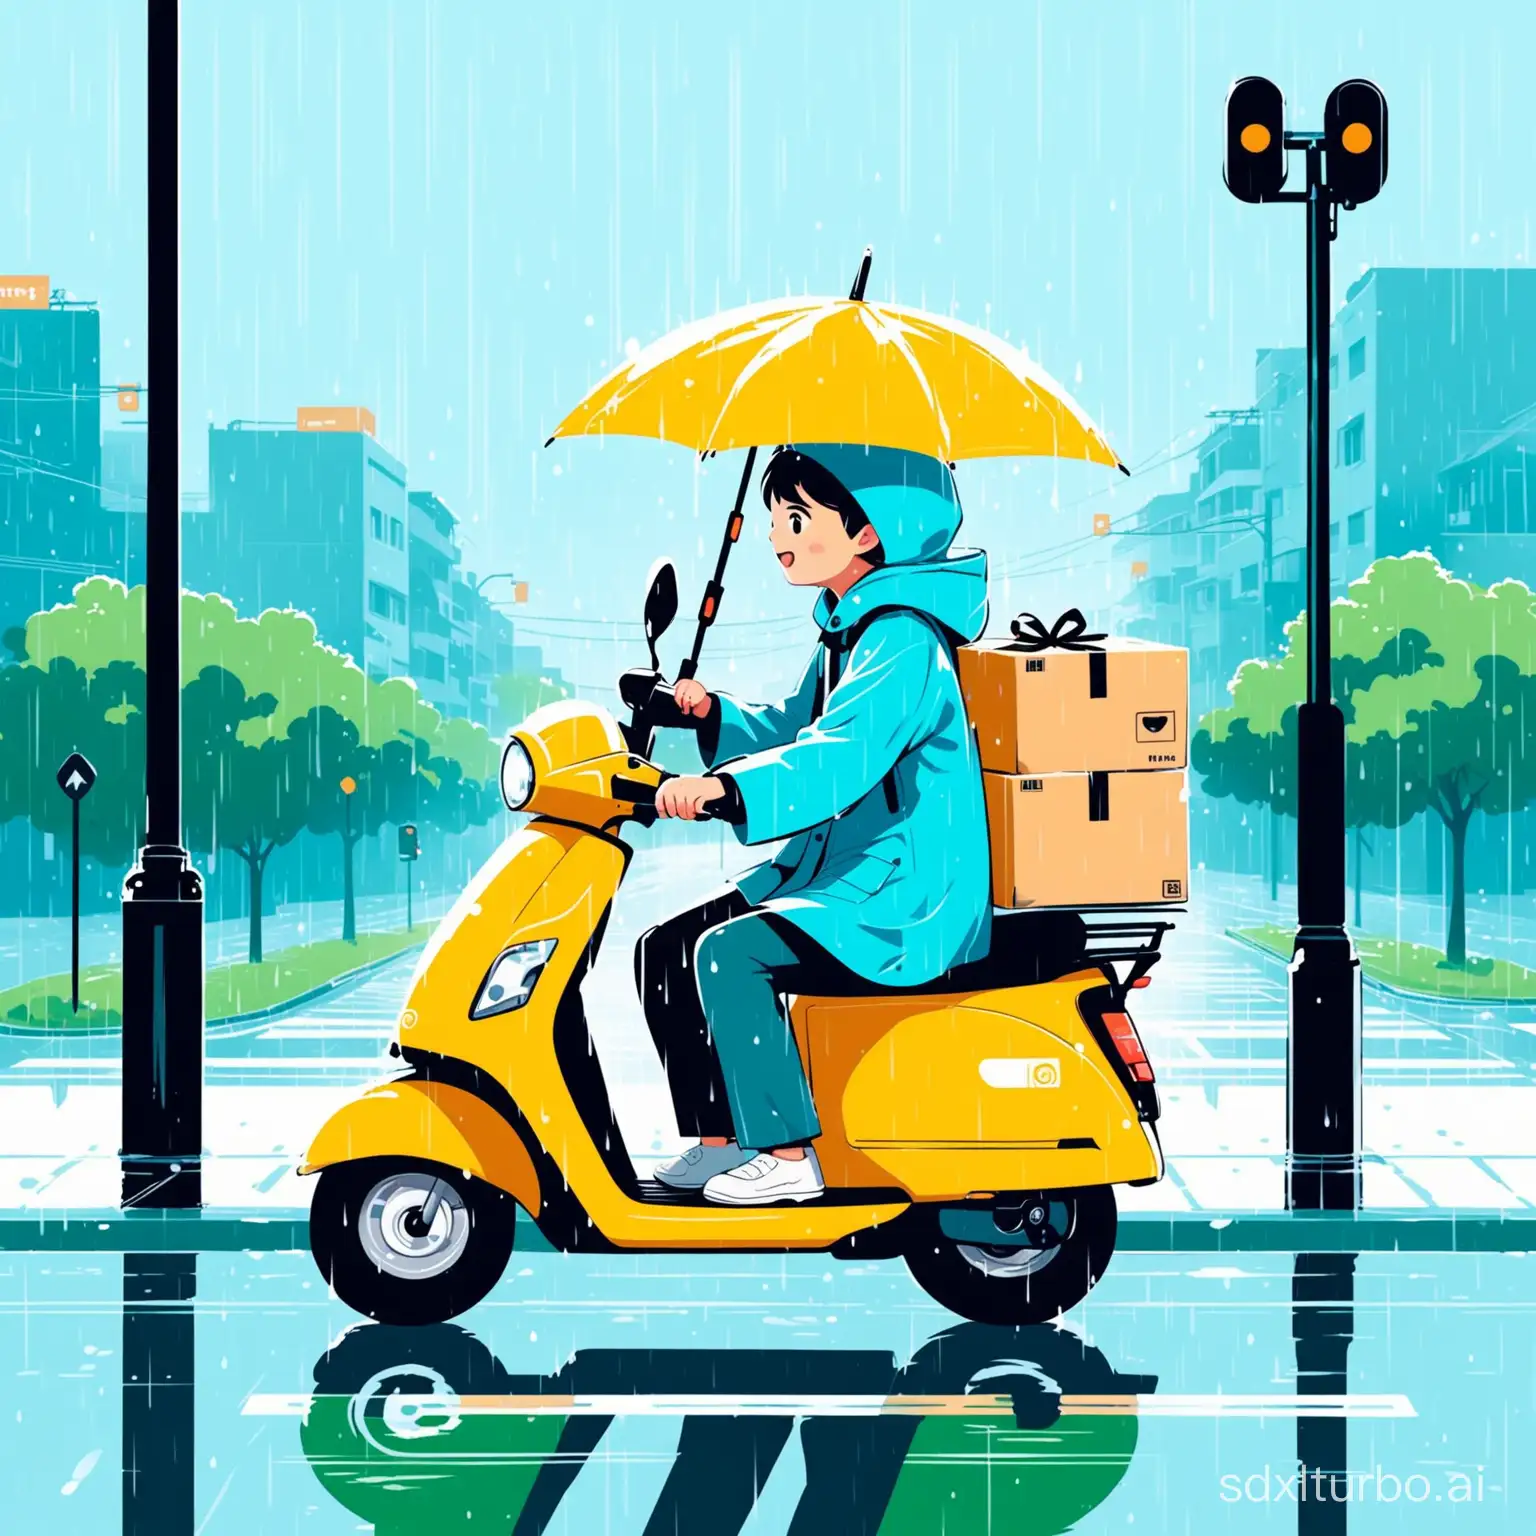 Rainy-Day-Delivery-Electric-Scooter-Ride-with-a-Child